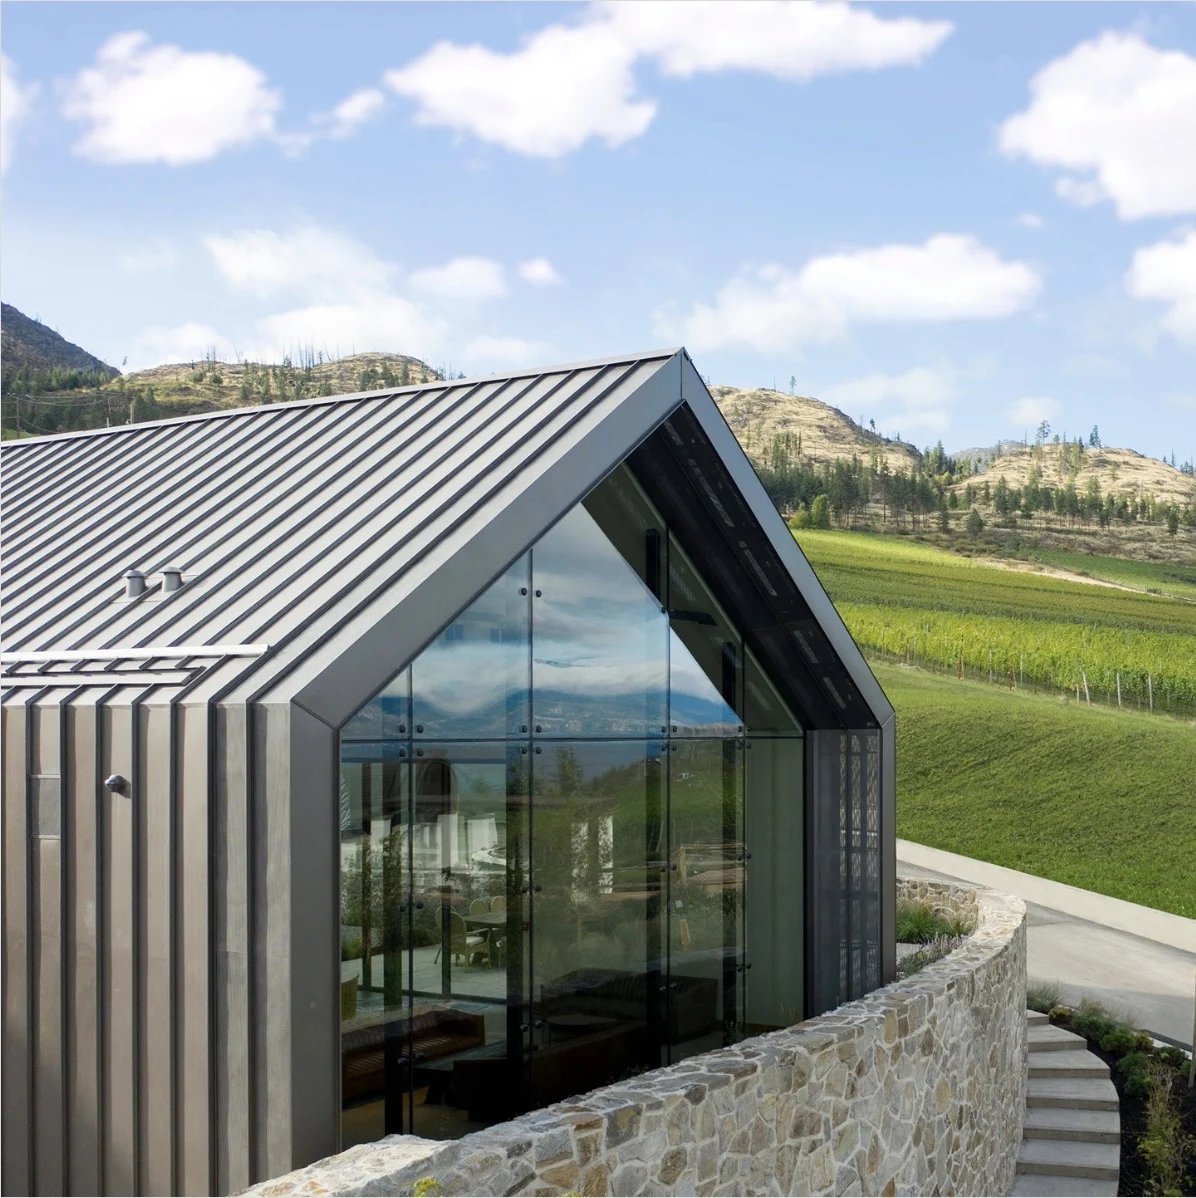 Looking for the best wineries in Kelowna for lunch? This guide is for you! Here's a list of the best Kelowna wineries with restaurants to enjoy an amazing lunch with wine in the sun. Pictured here: CedarCreek Estate Winery